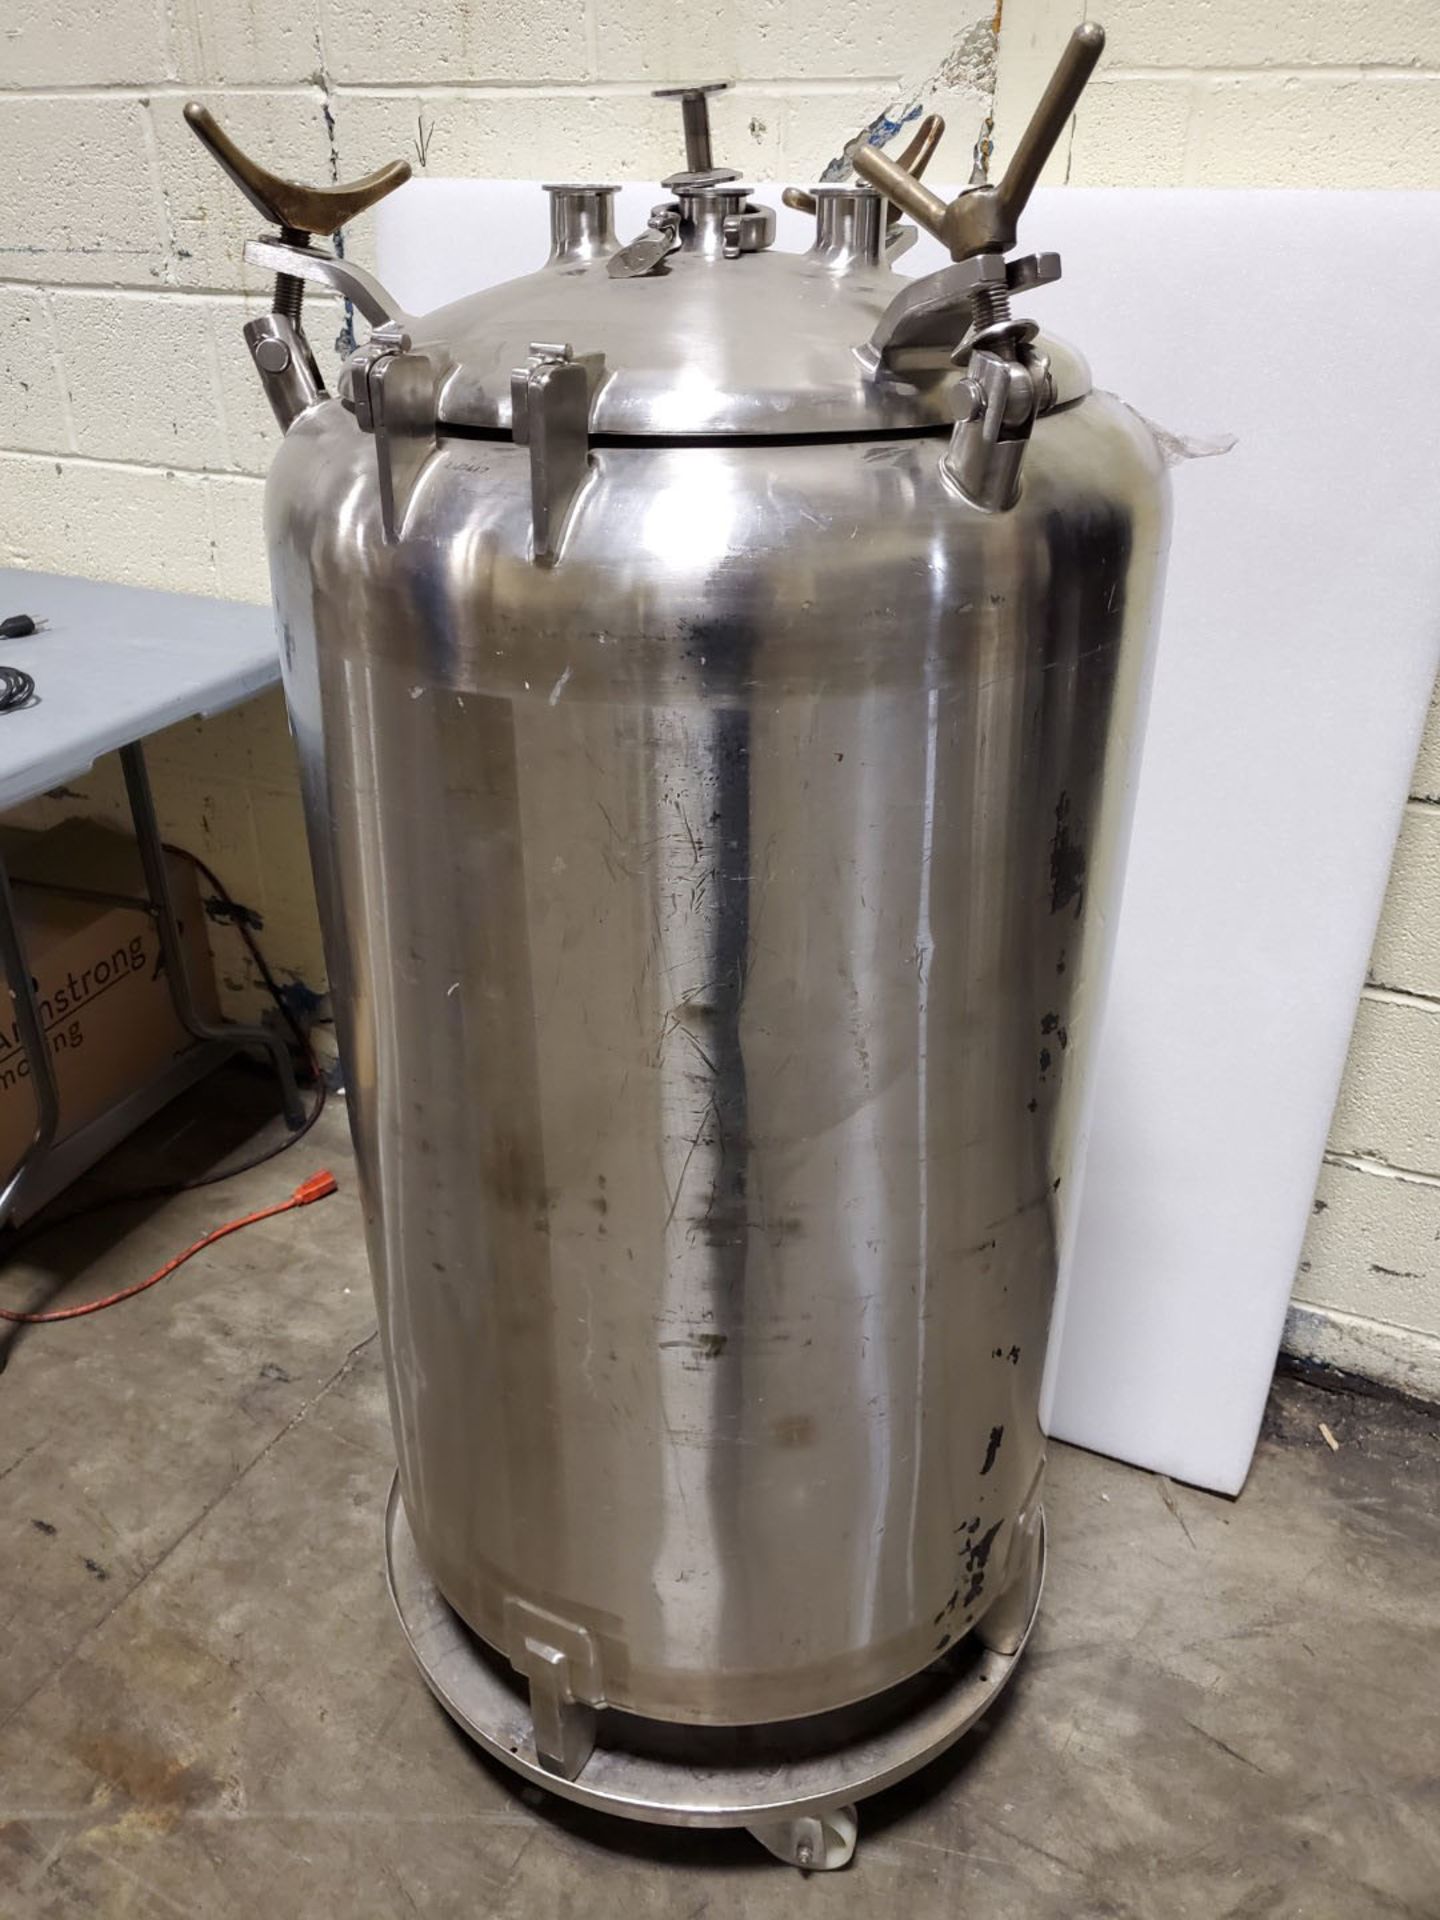 Letsch stainless steel pressure vessel 316L S/S - Image 3 of 6